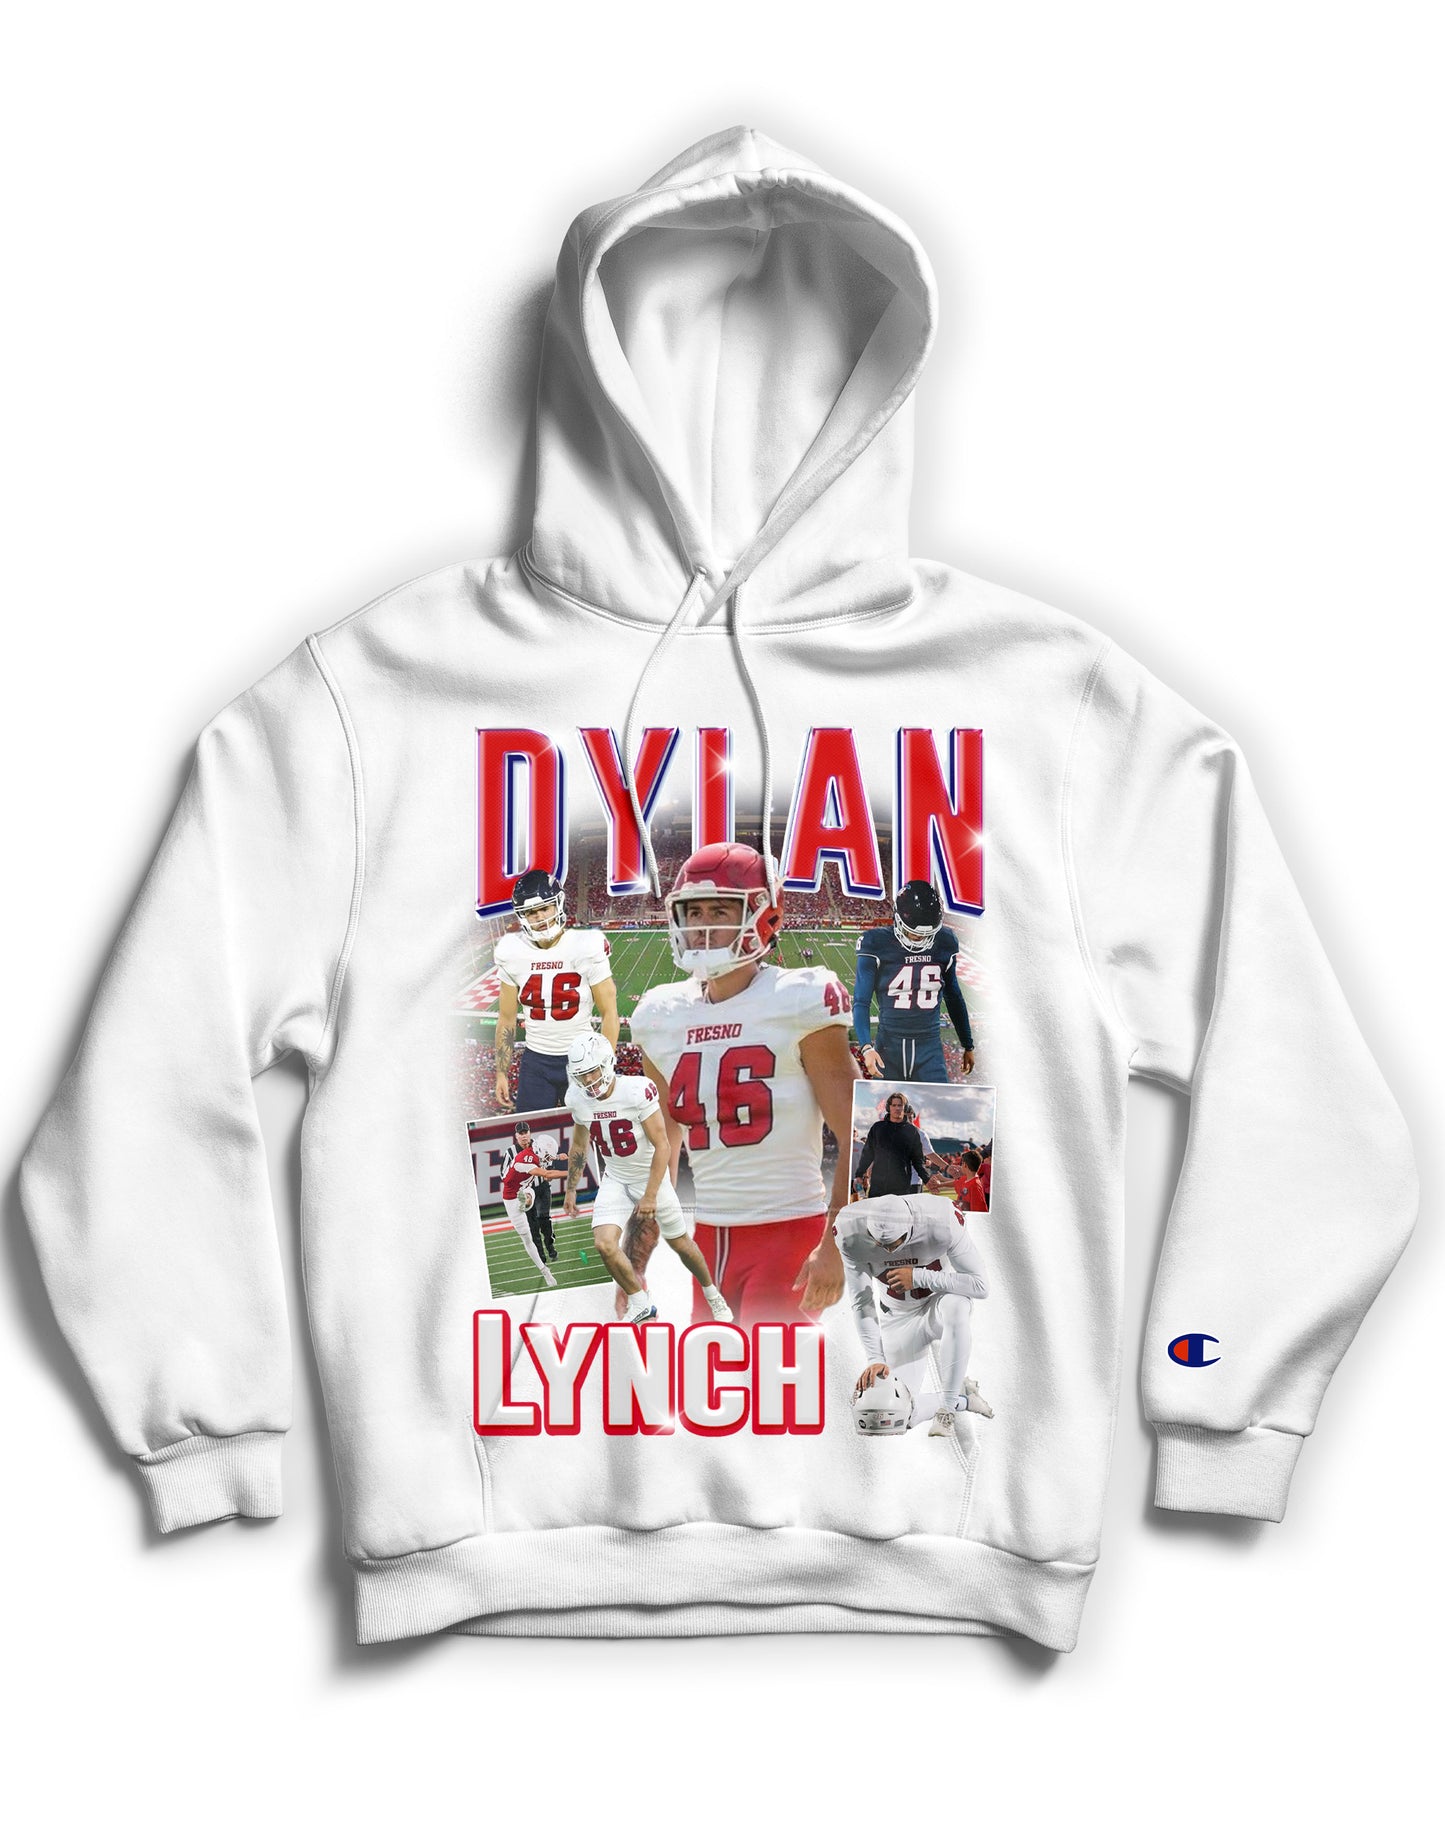 Dylan Lynch Tribute Hoodie *LIMITED EDITION* (Black & White)